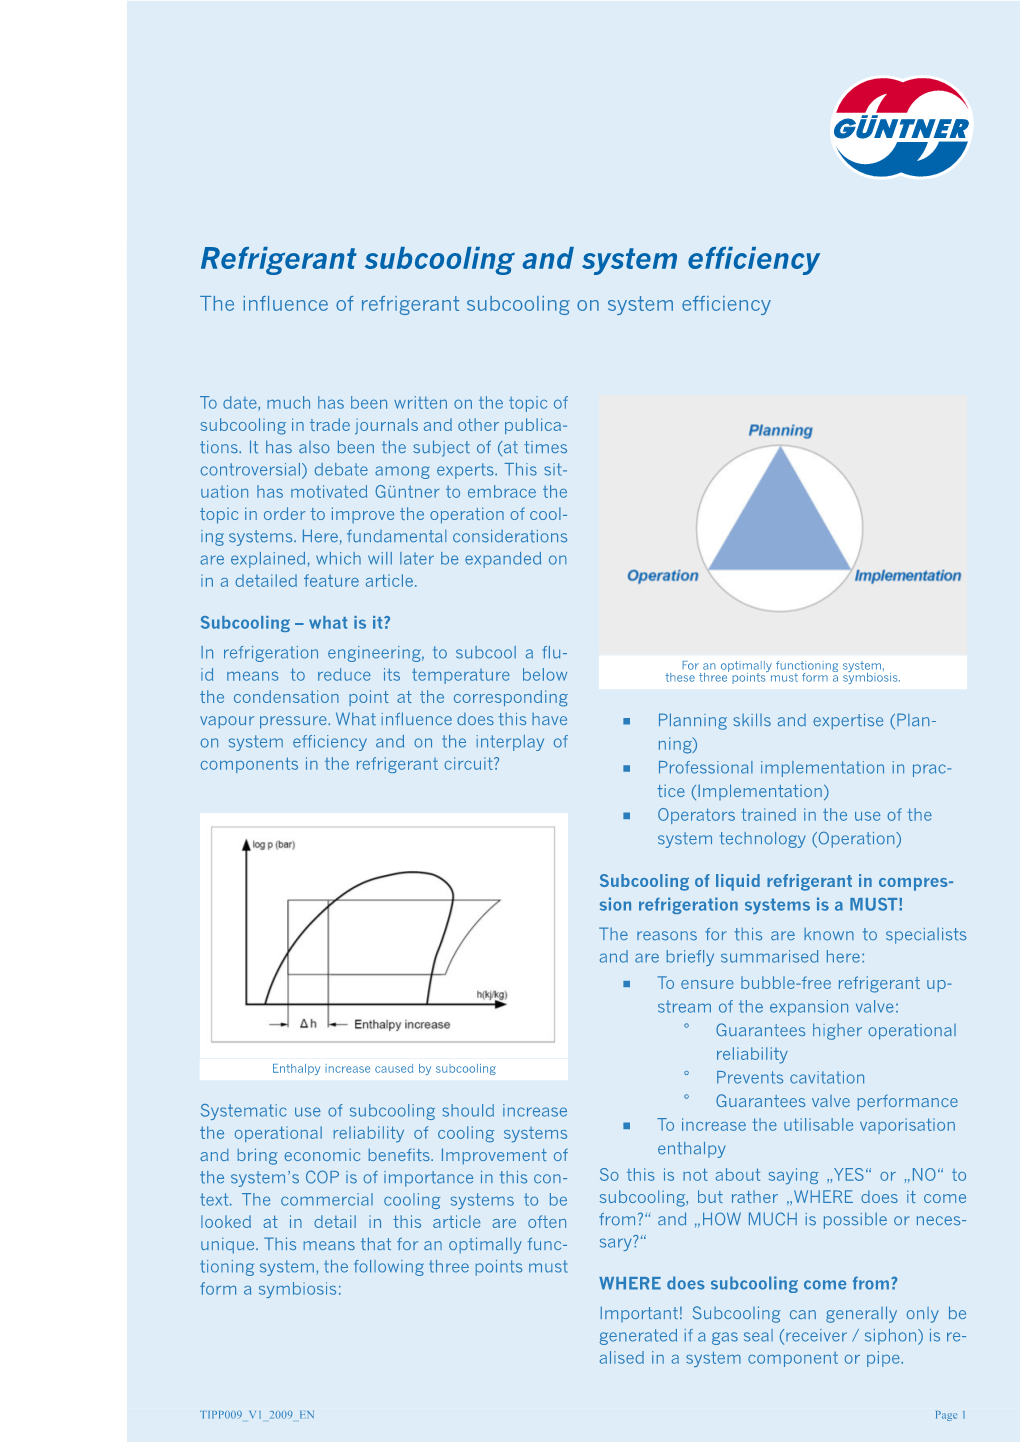 Refrigerant Subcooling and System Efficiency the Influence of Refrigerant Subcooling on System Efficiency